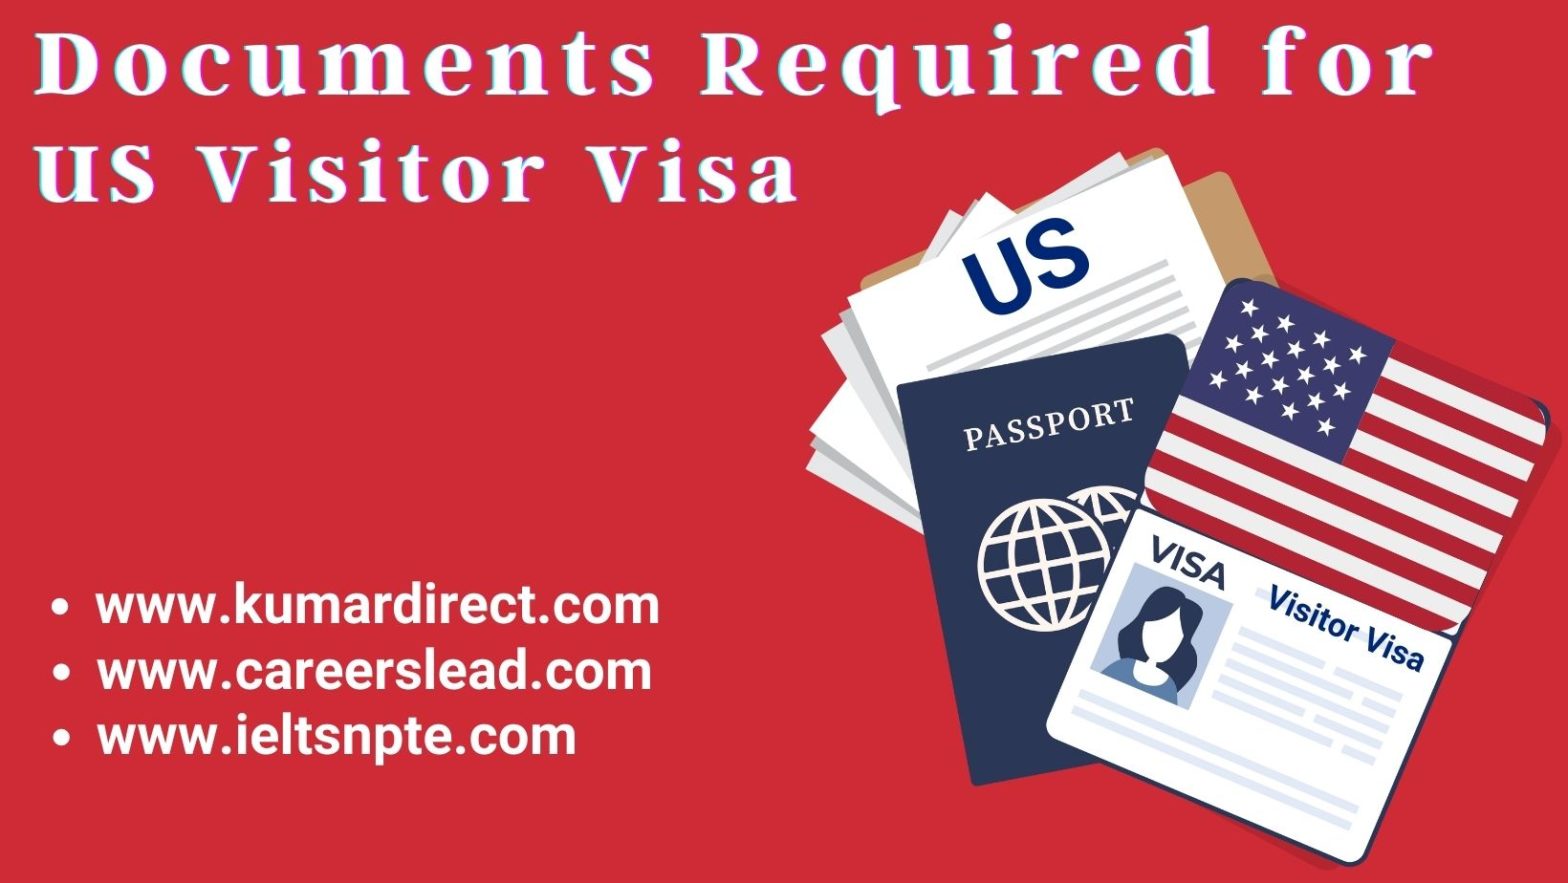 Documents Required for US Visitor Visa